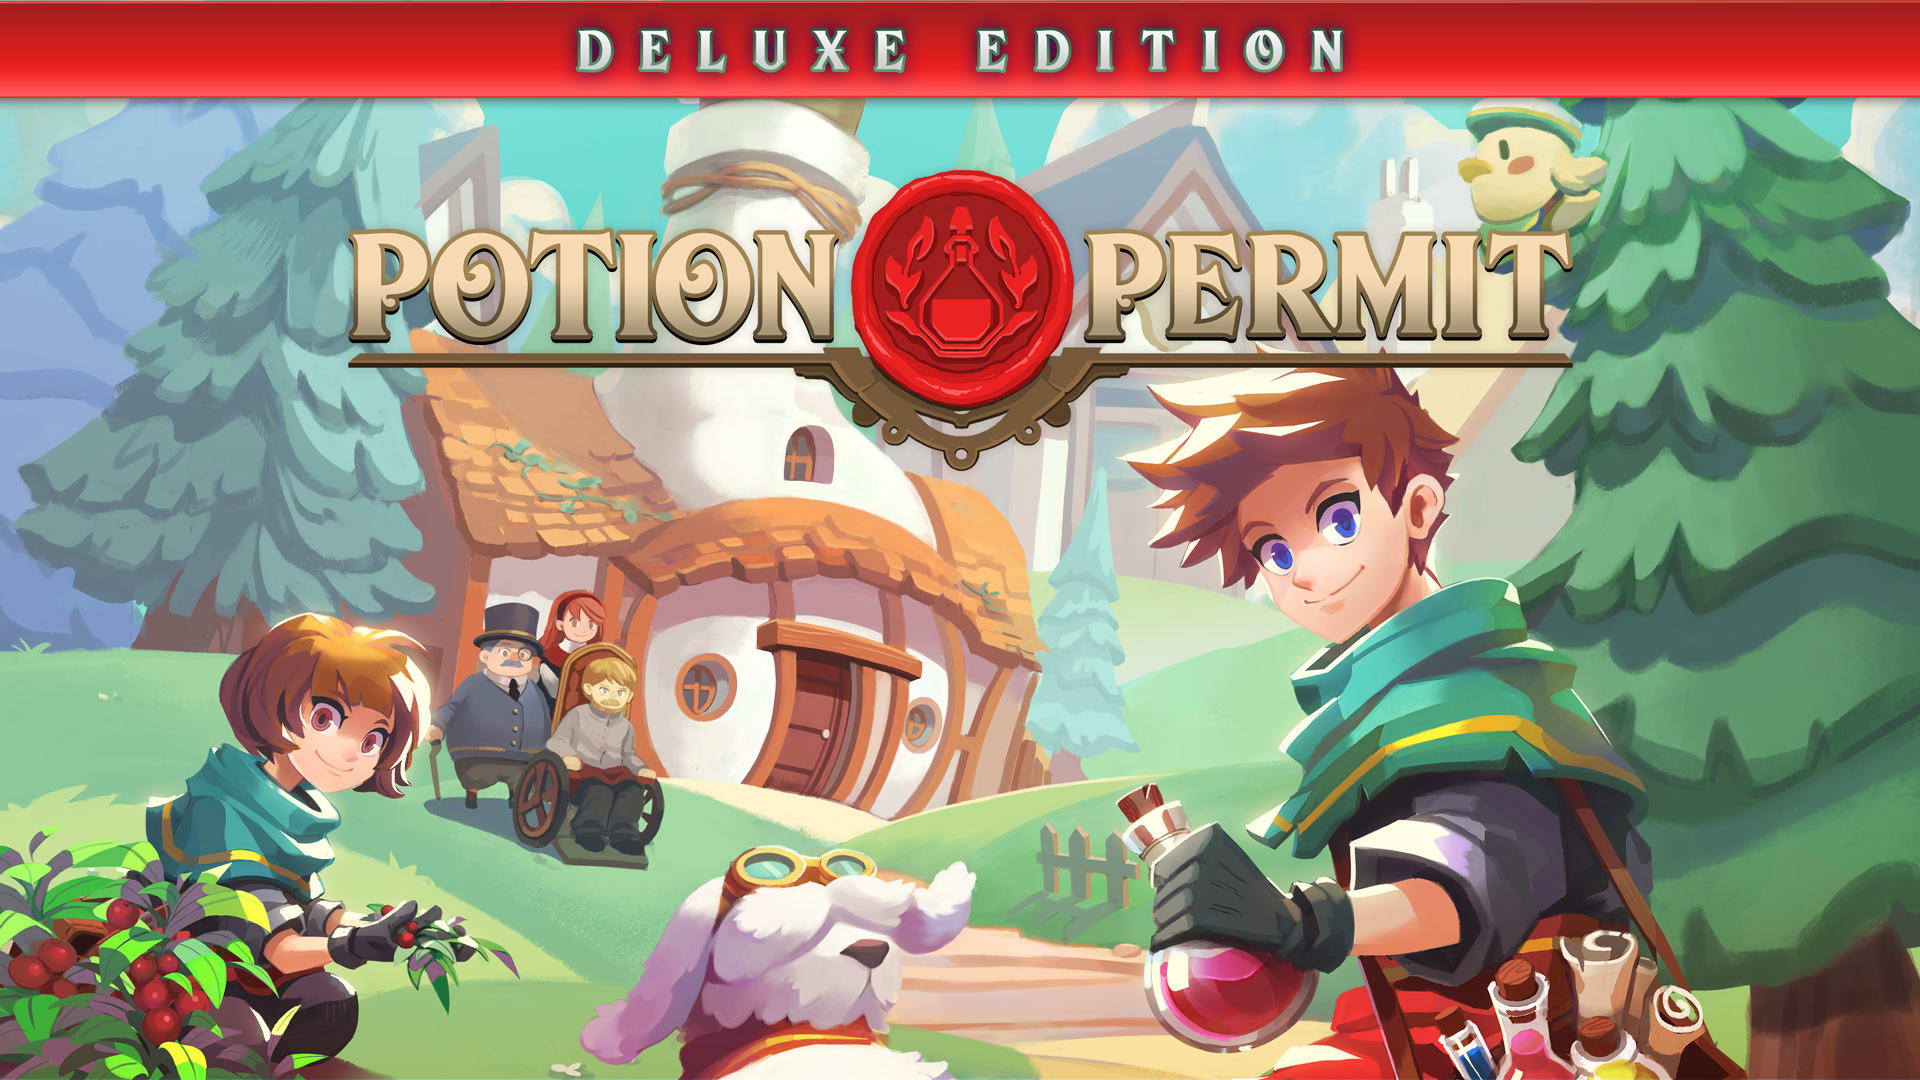 Potion Permit - Deluxe Edition